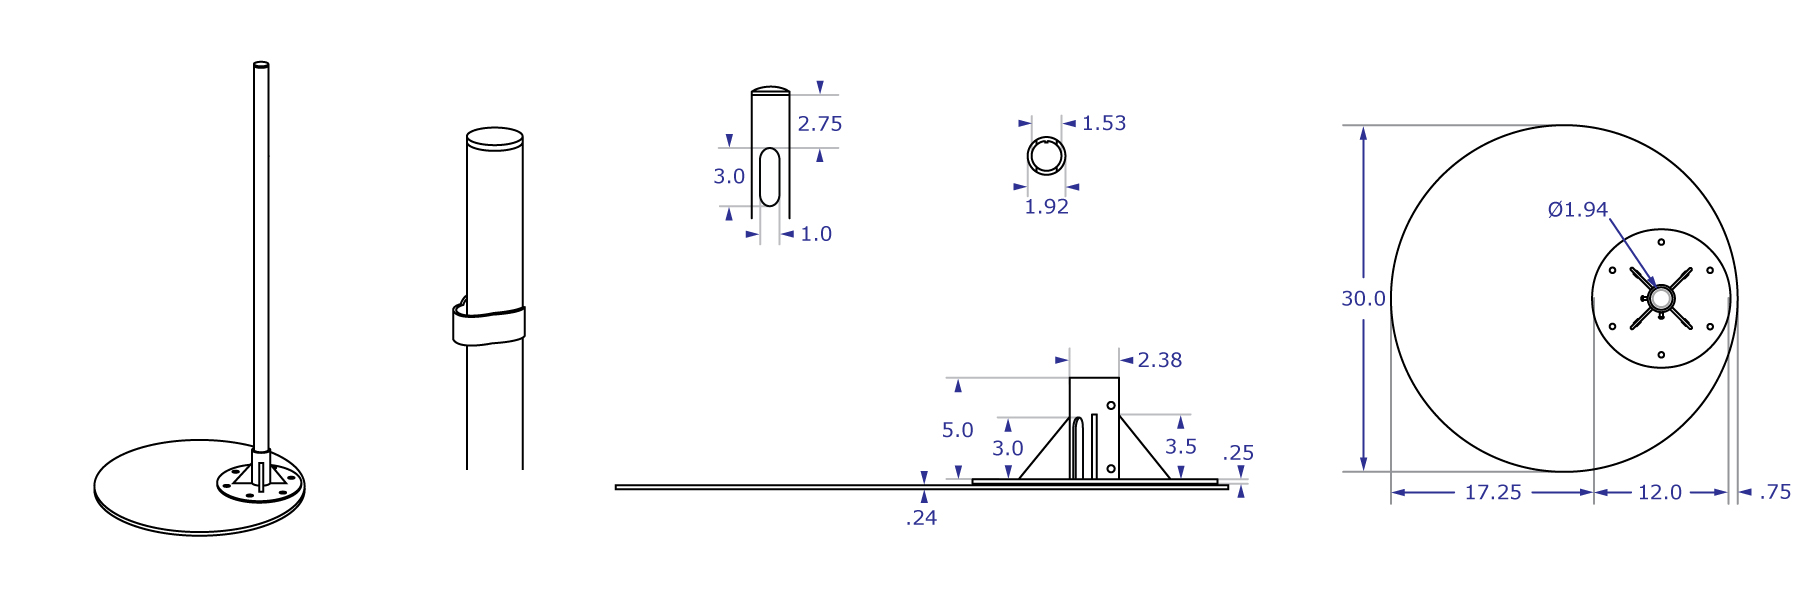 192OFFSET pole floor stand specification drawings showing pole and base side and top views with measurements